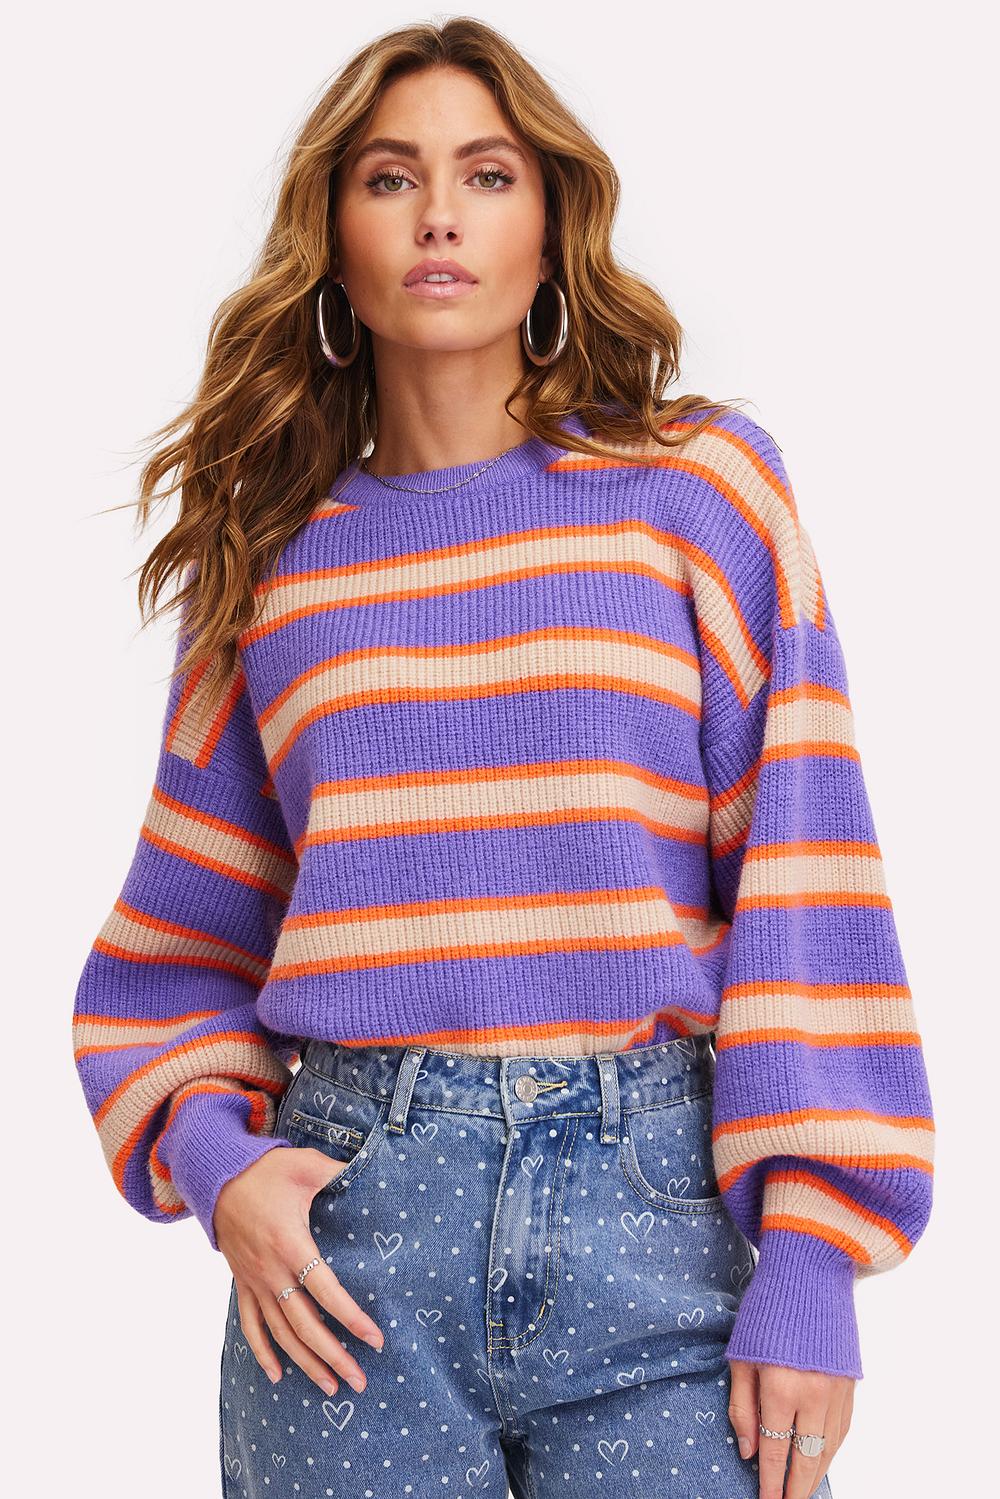 Purple jumper with stripes